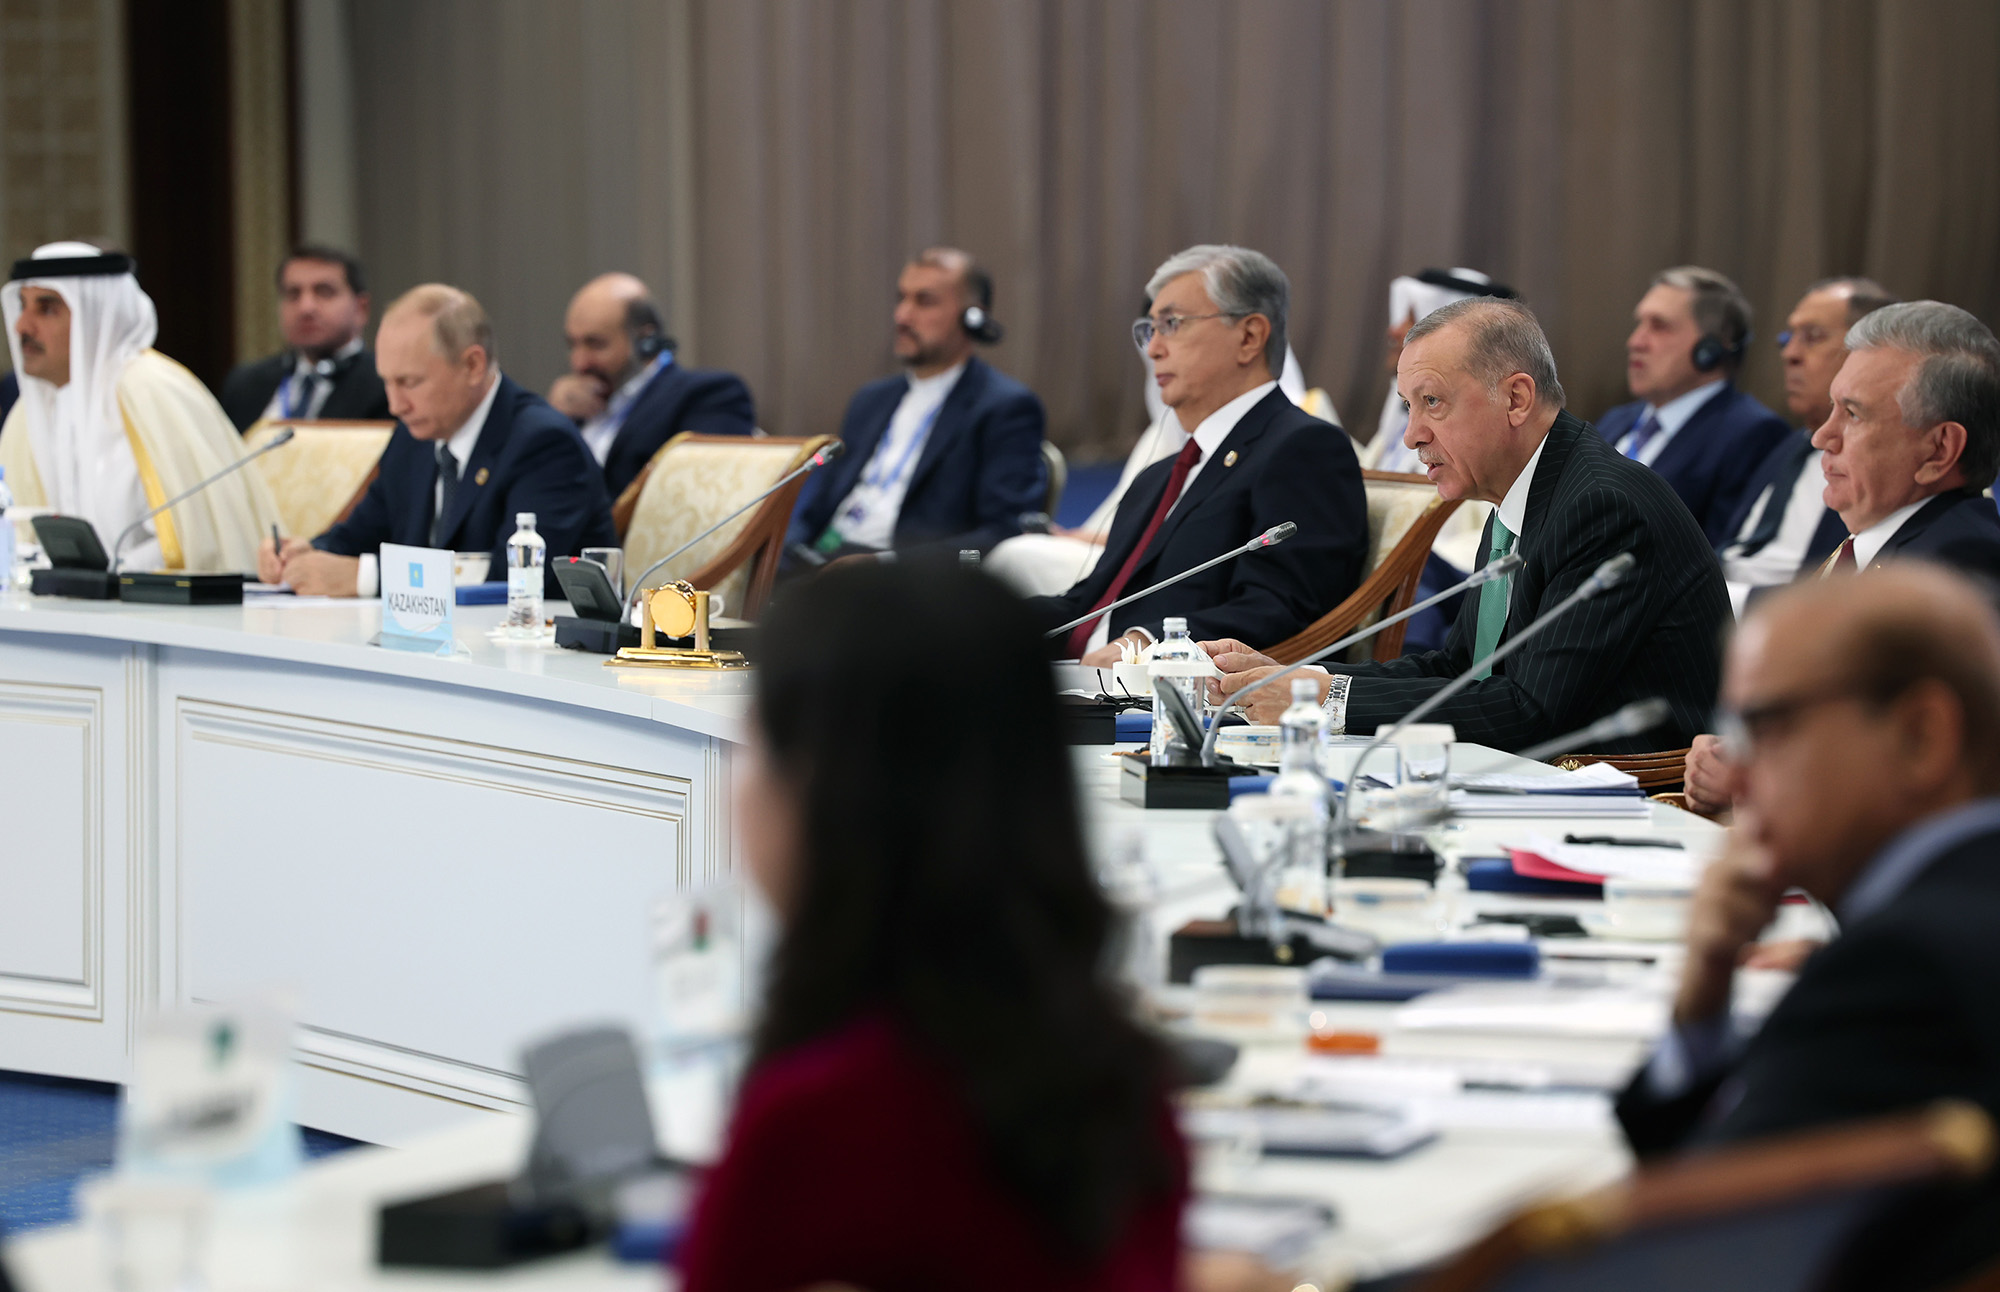 Turkish President Recep Tayyip Erdogan, fifth right, speaks during the Conference on Interaction and Confidence Building Measures in Asia (CICA) in Astana, Kazakhstan, on October 13.